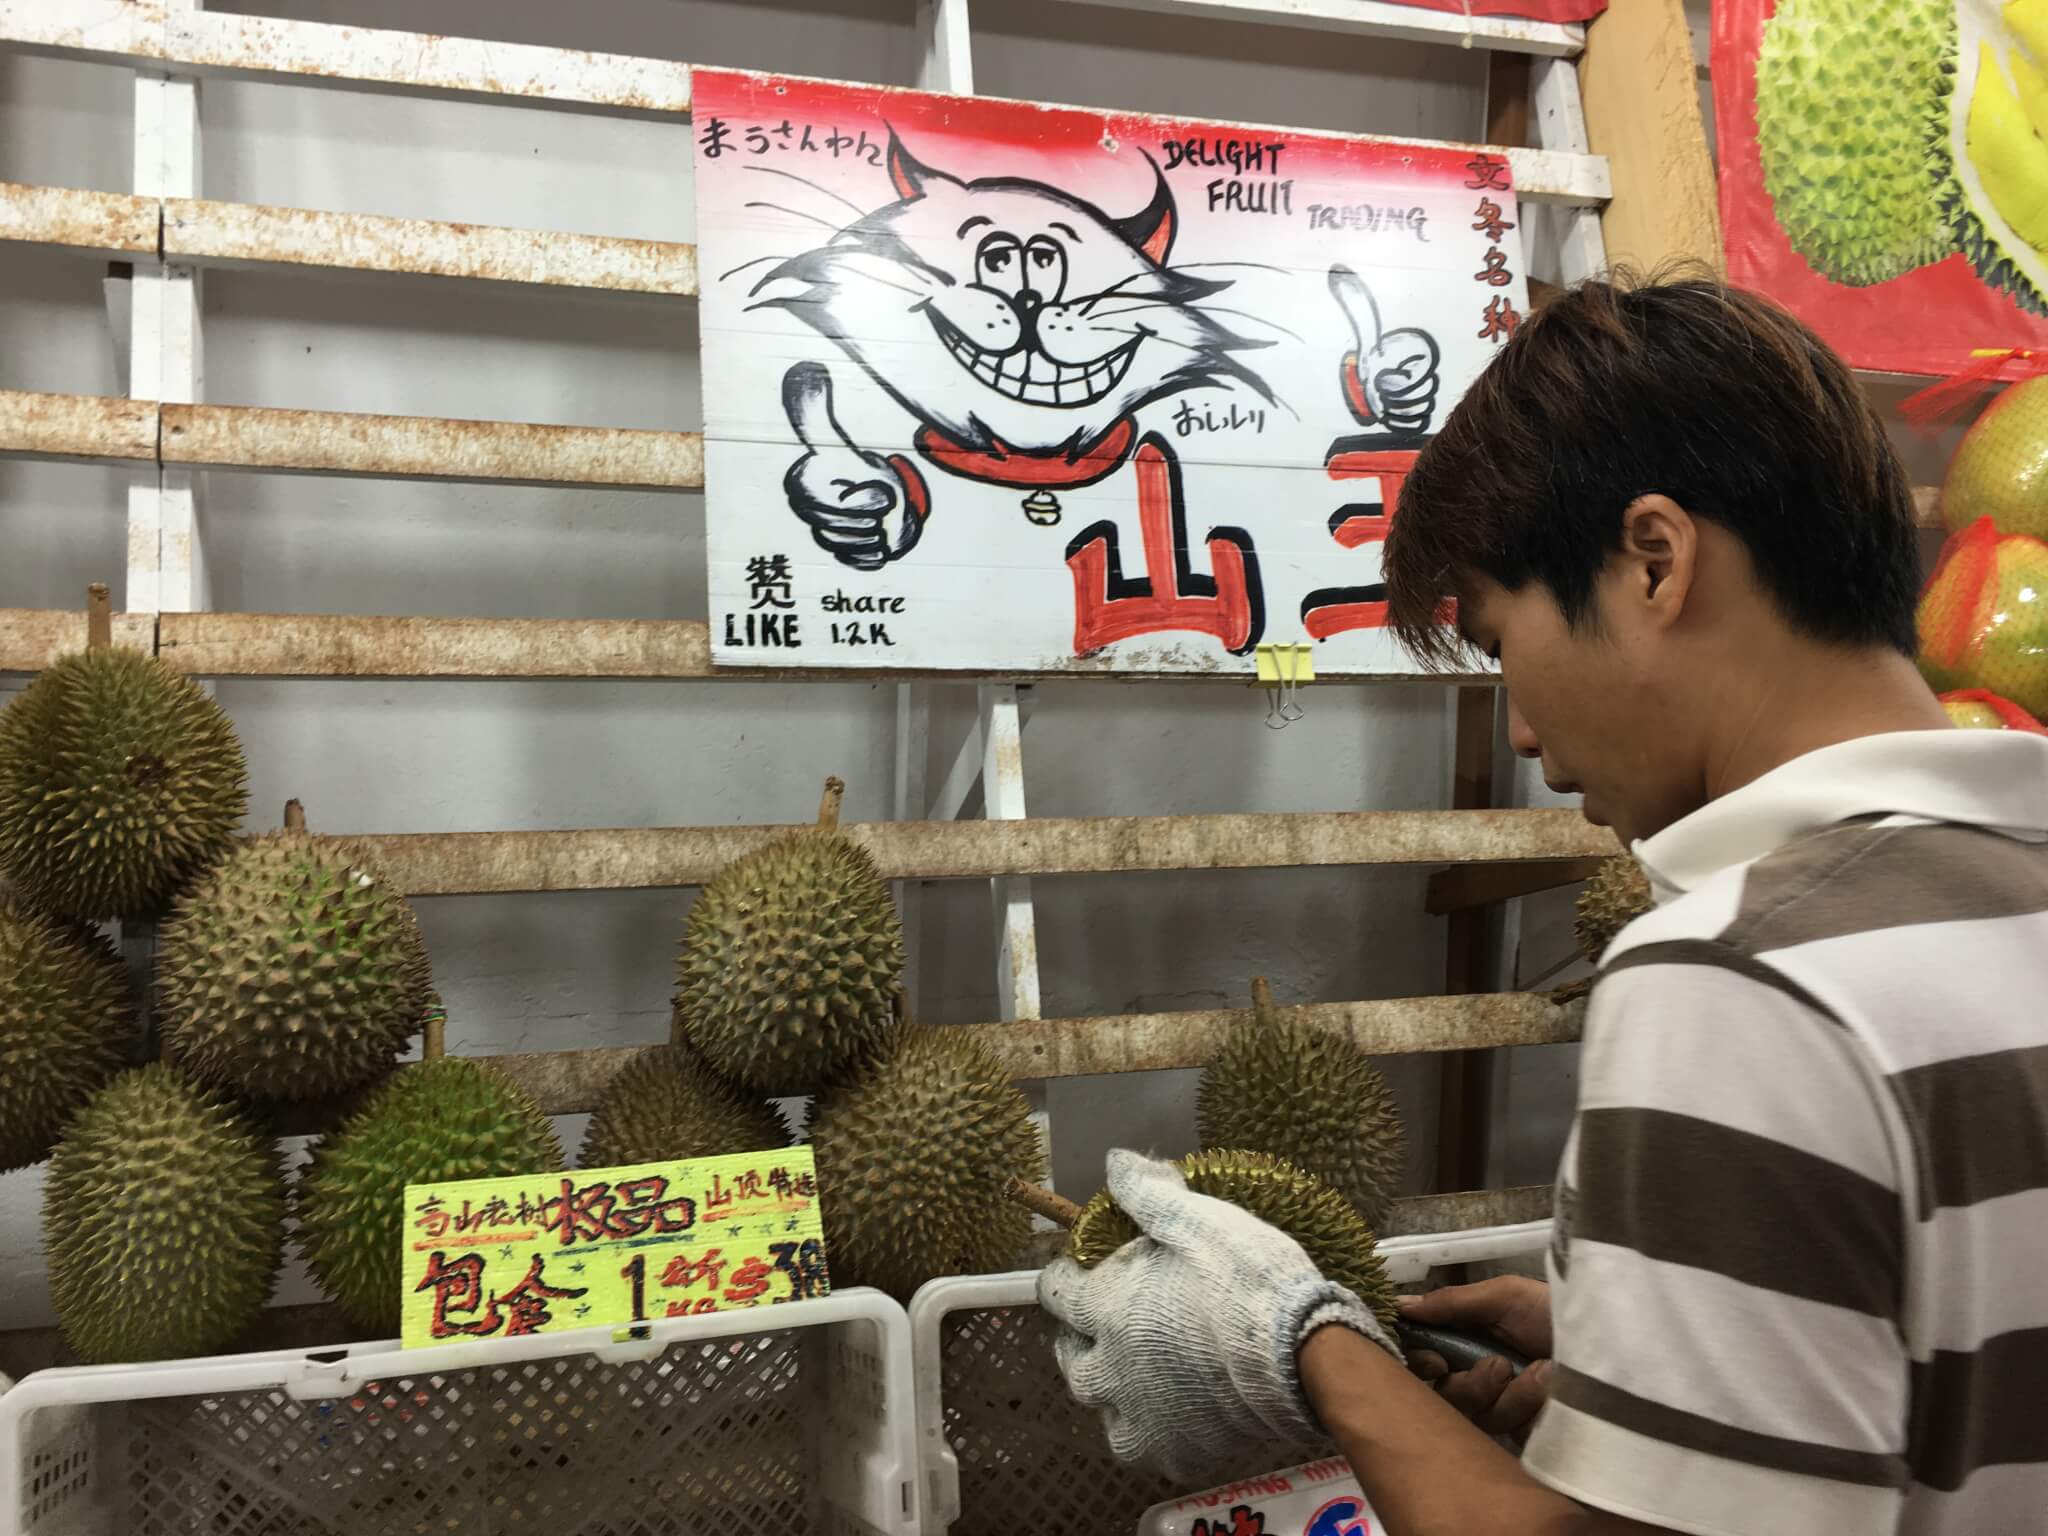 Durian Fruit Stall on Geylang Road